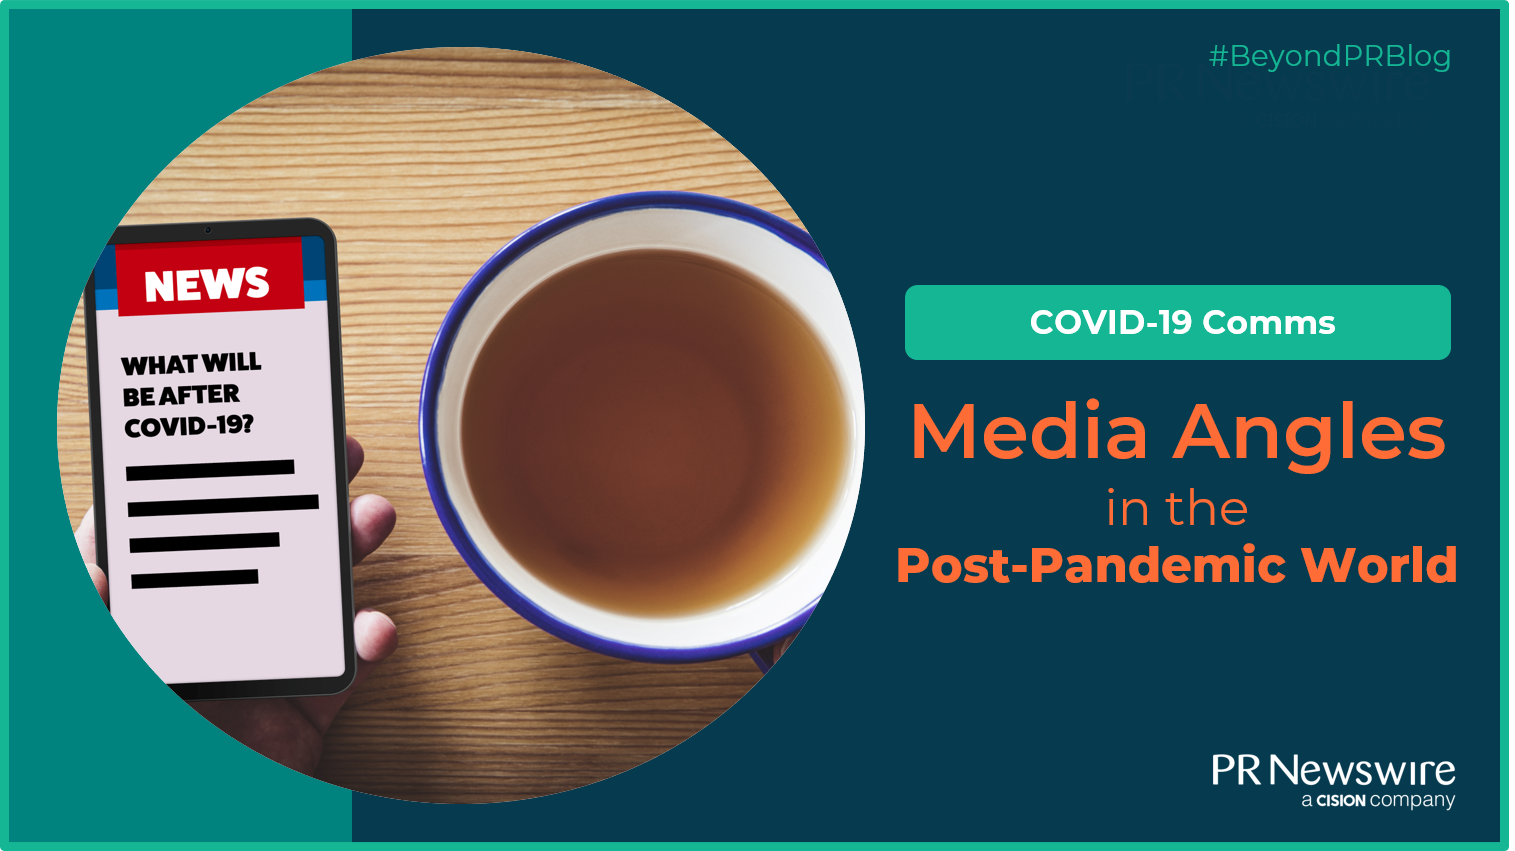 COVID-19 Comms: Media Angles in the Post-Pandemic World